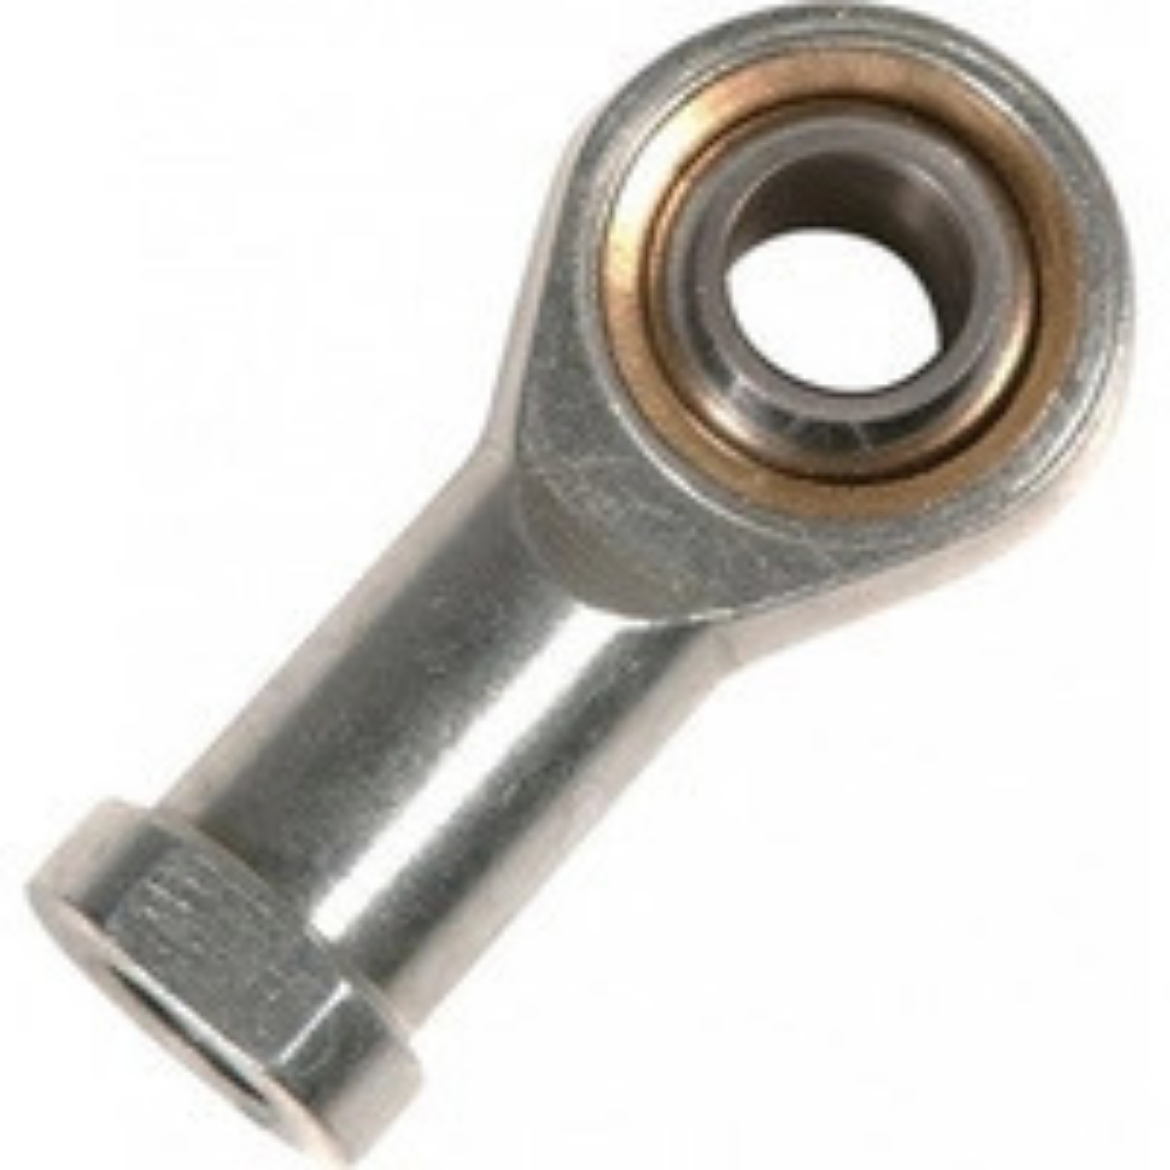 Picture of ROD END RH 1/2 BORE, 1/2-20 FEMALE END